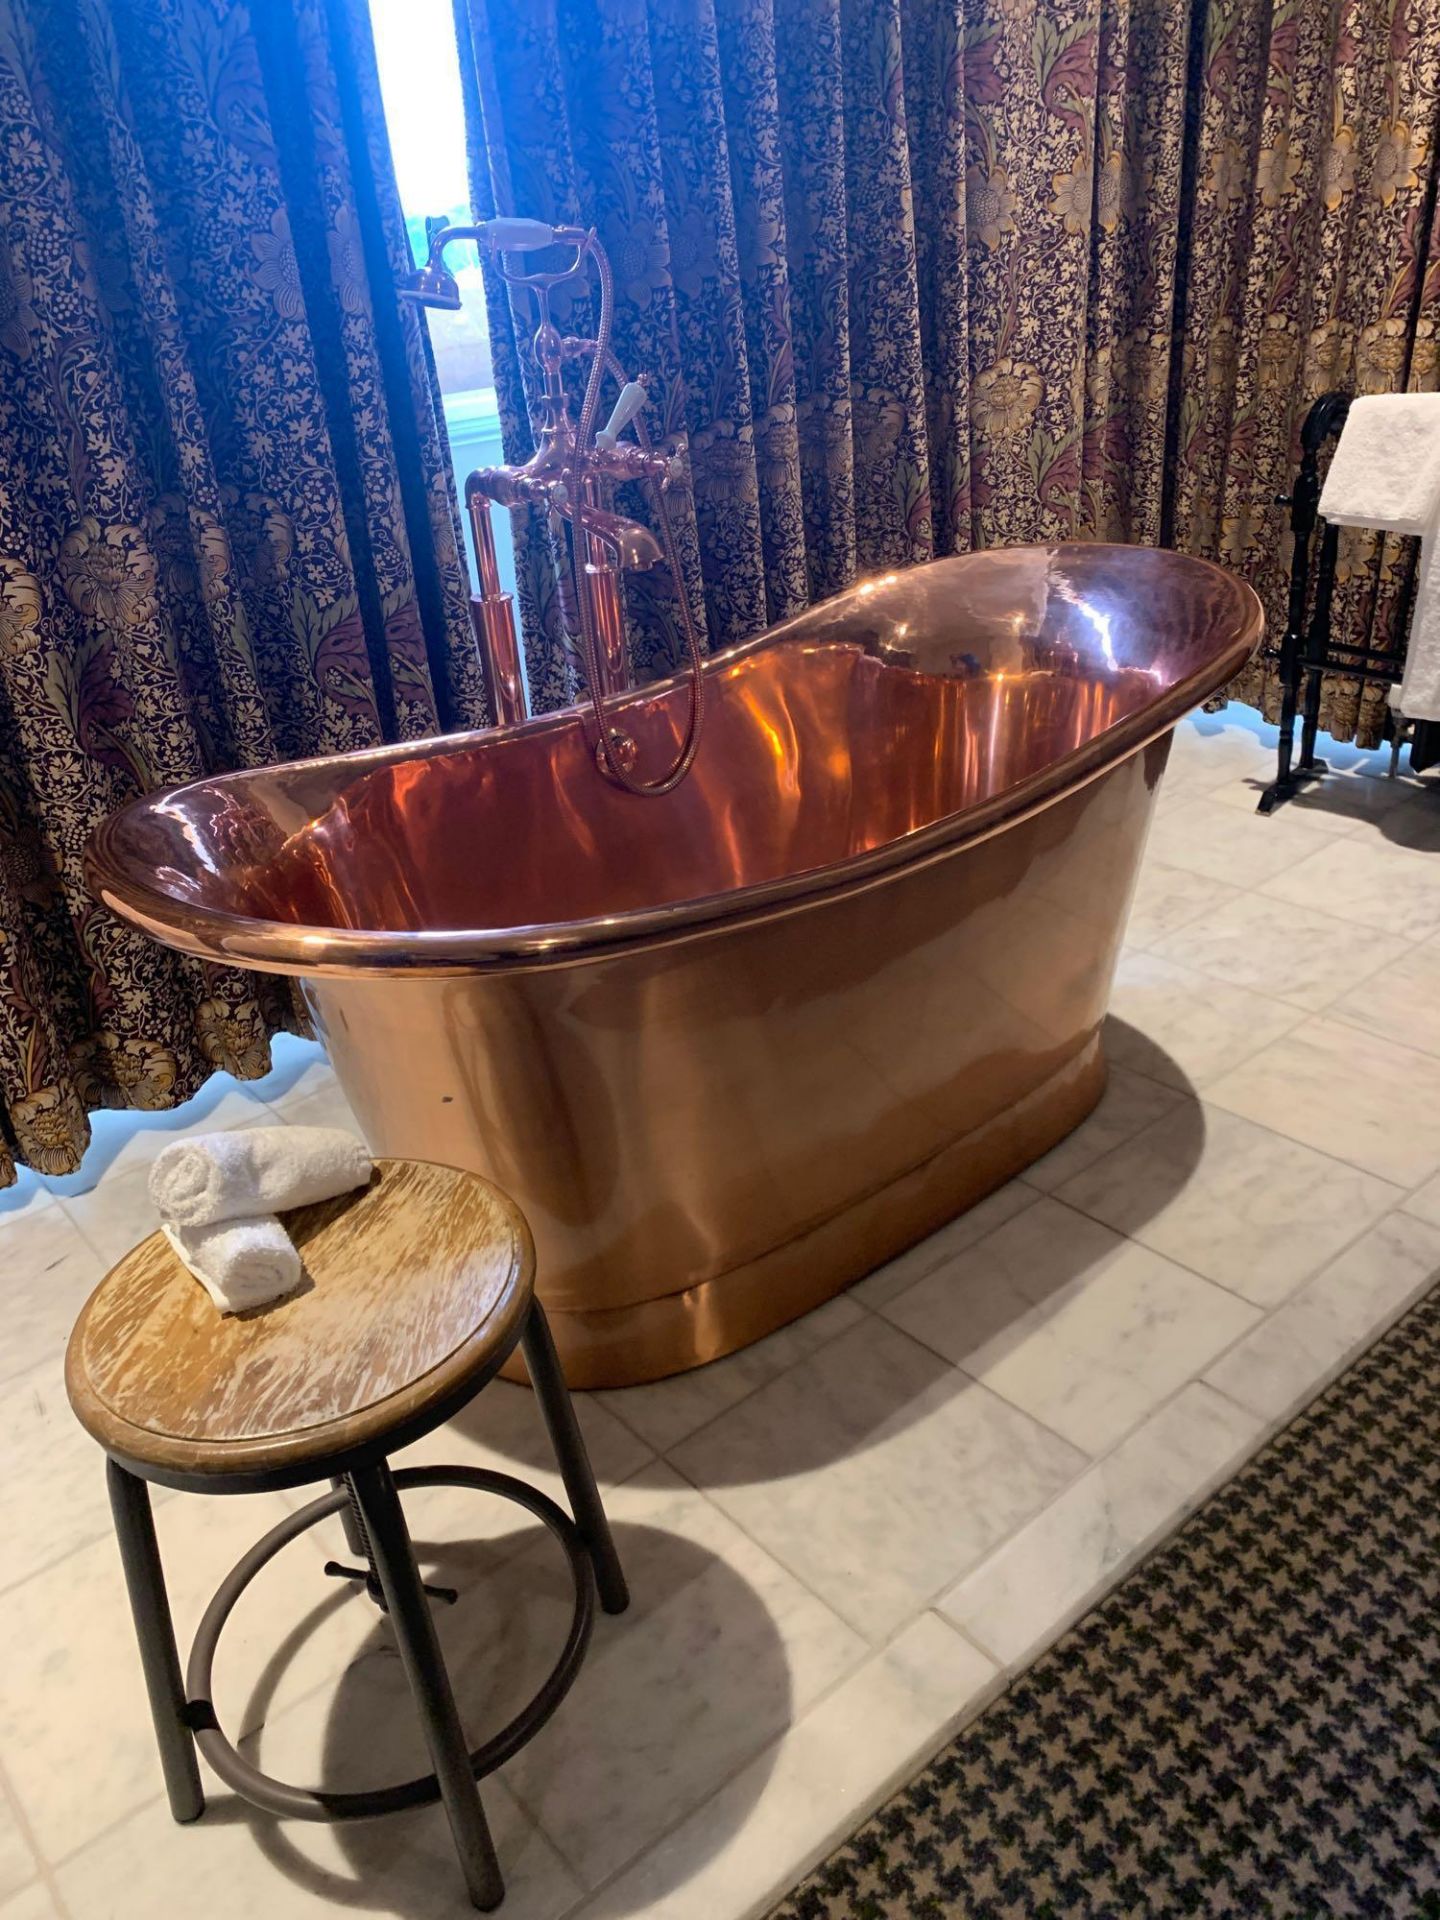 Copper Slipper Bath With Taps And Shower Polished Copper Throughout 150cm x 65cm x 64cm - Image 5 of 5